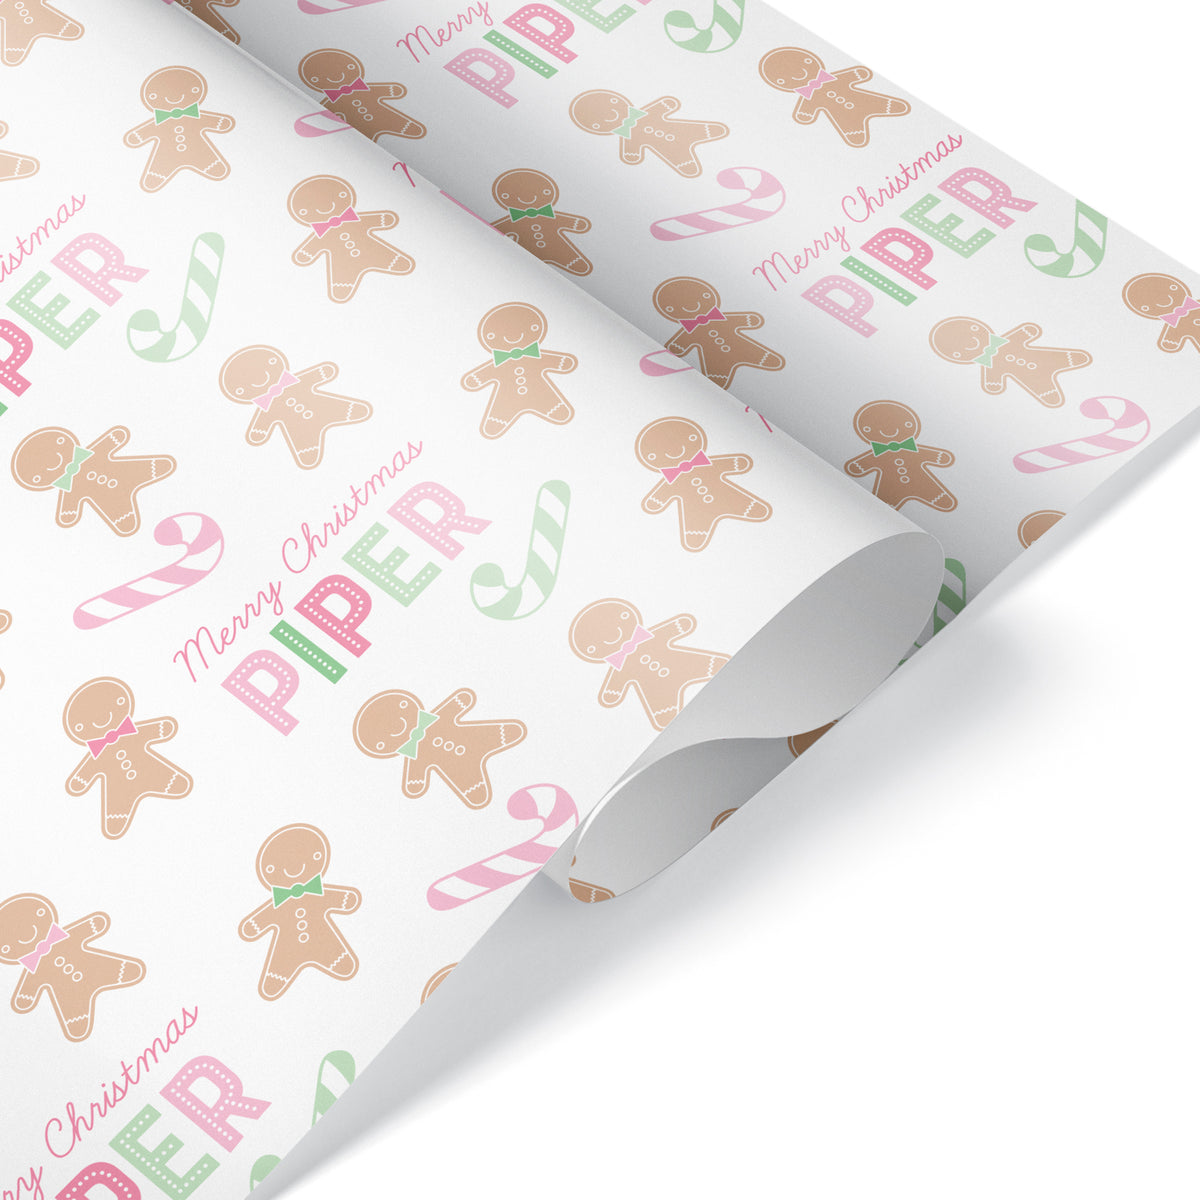 Gingerbread Pastel Christmas Personalized Wrapping Paper